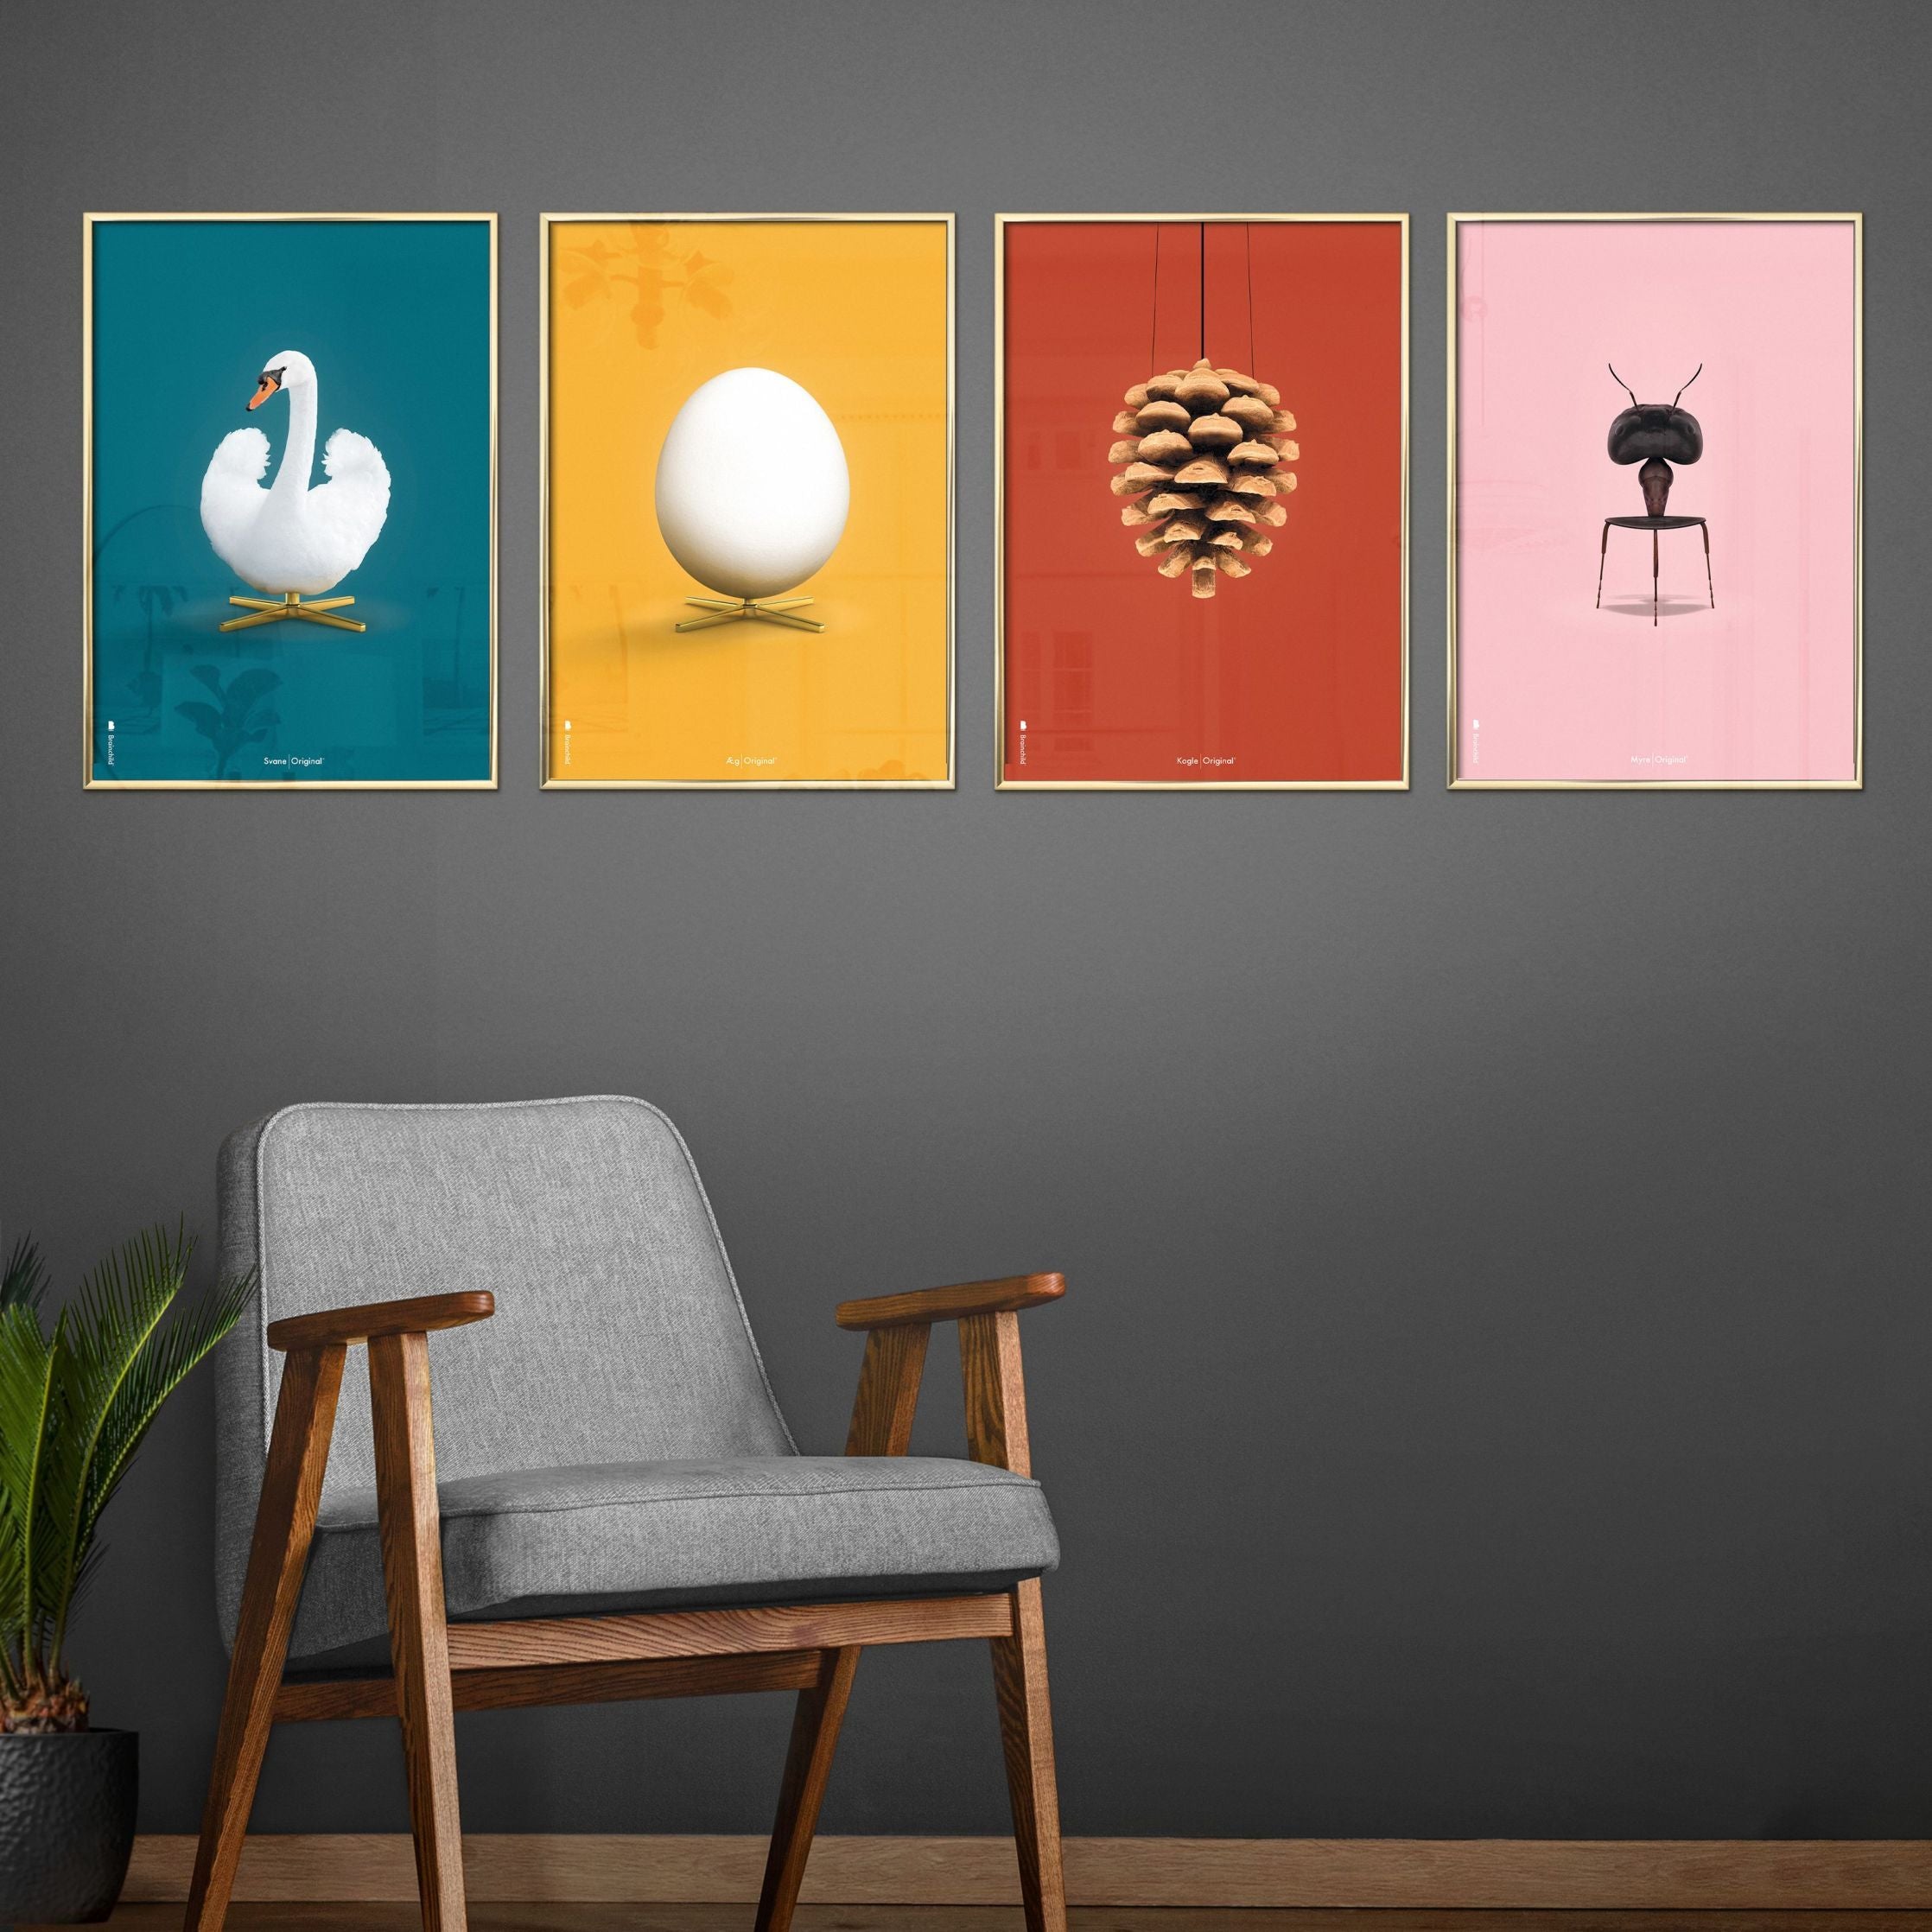 Brainchild Pine Cone Classic Poster, Frame Made Of Light Wood 70x100 Cm, Red Background